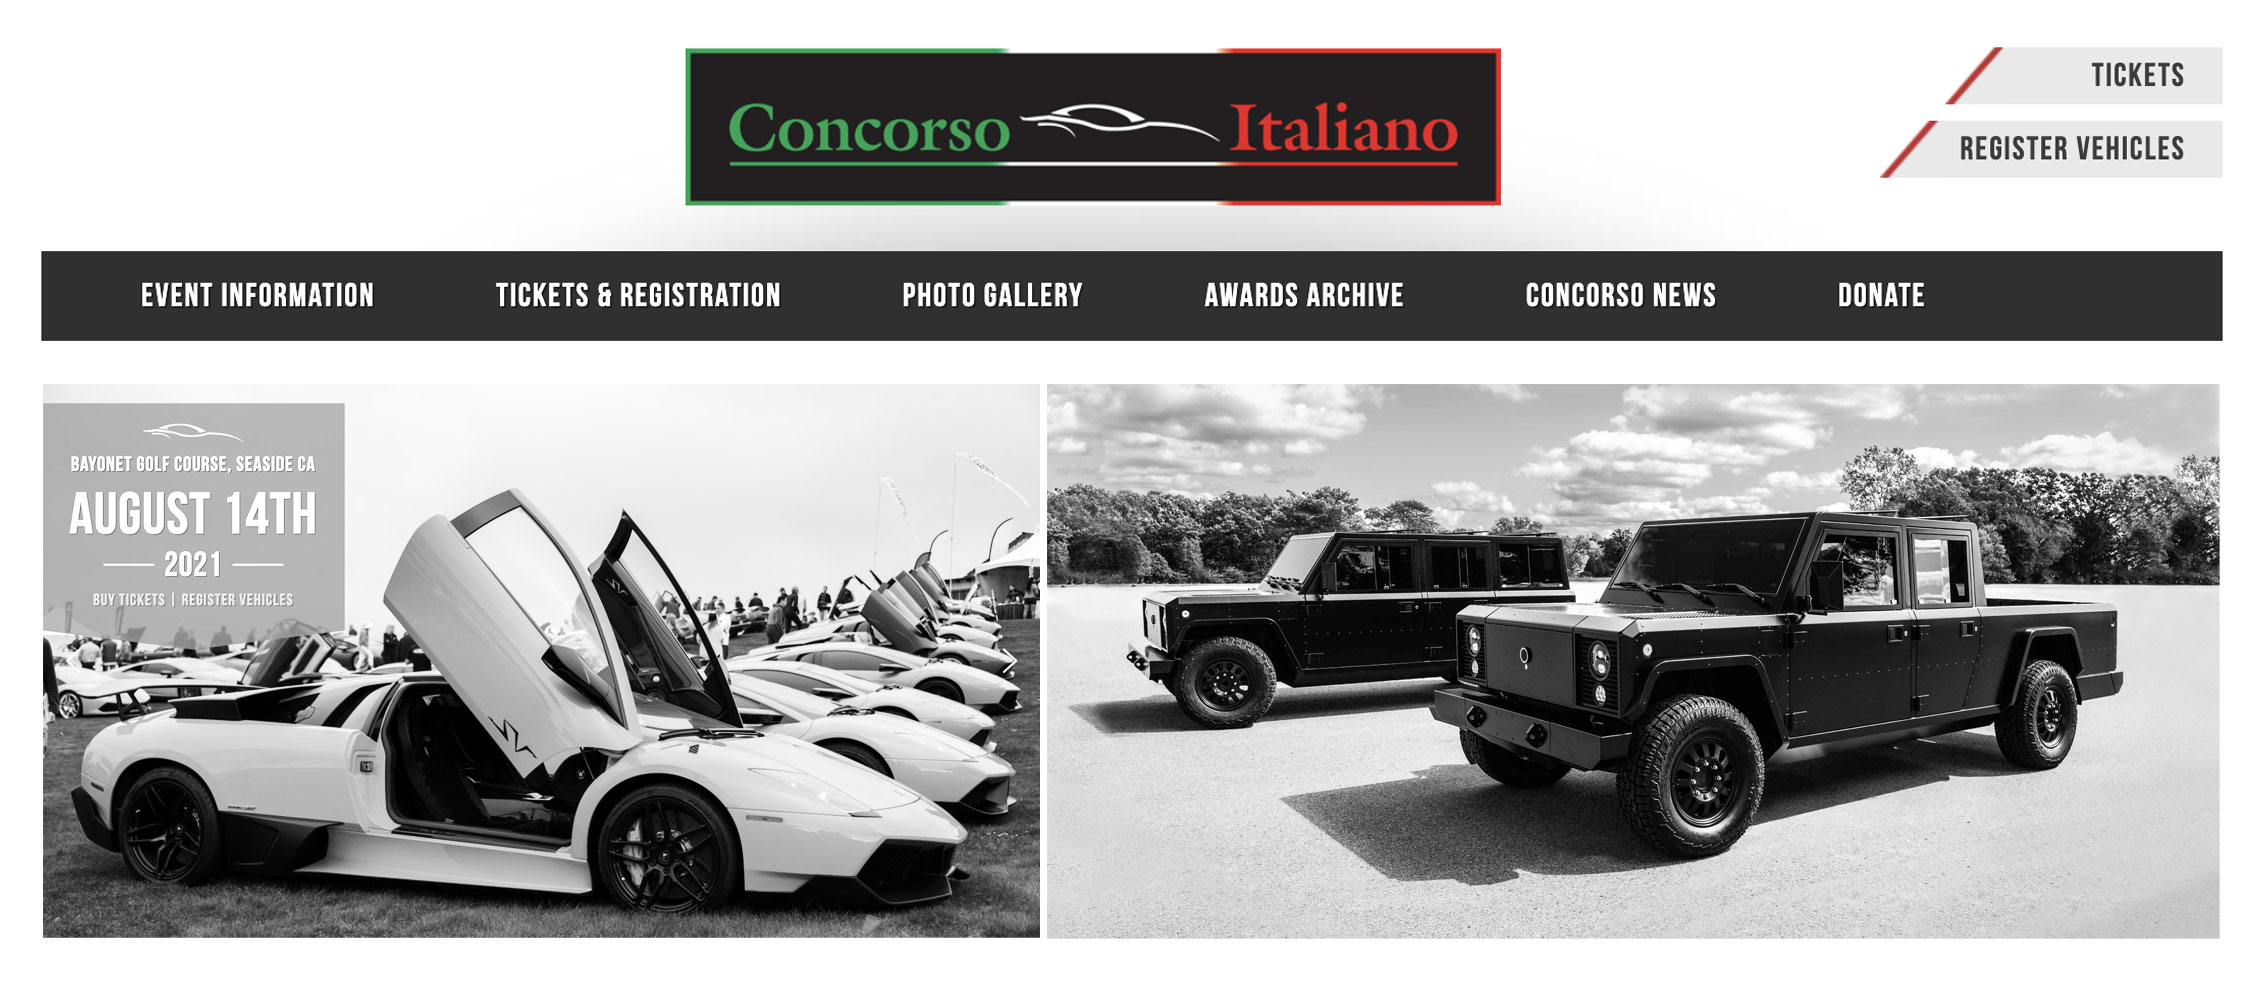 Image of Lamborghinis next an image of the Bollinger B1 and B2